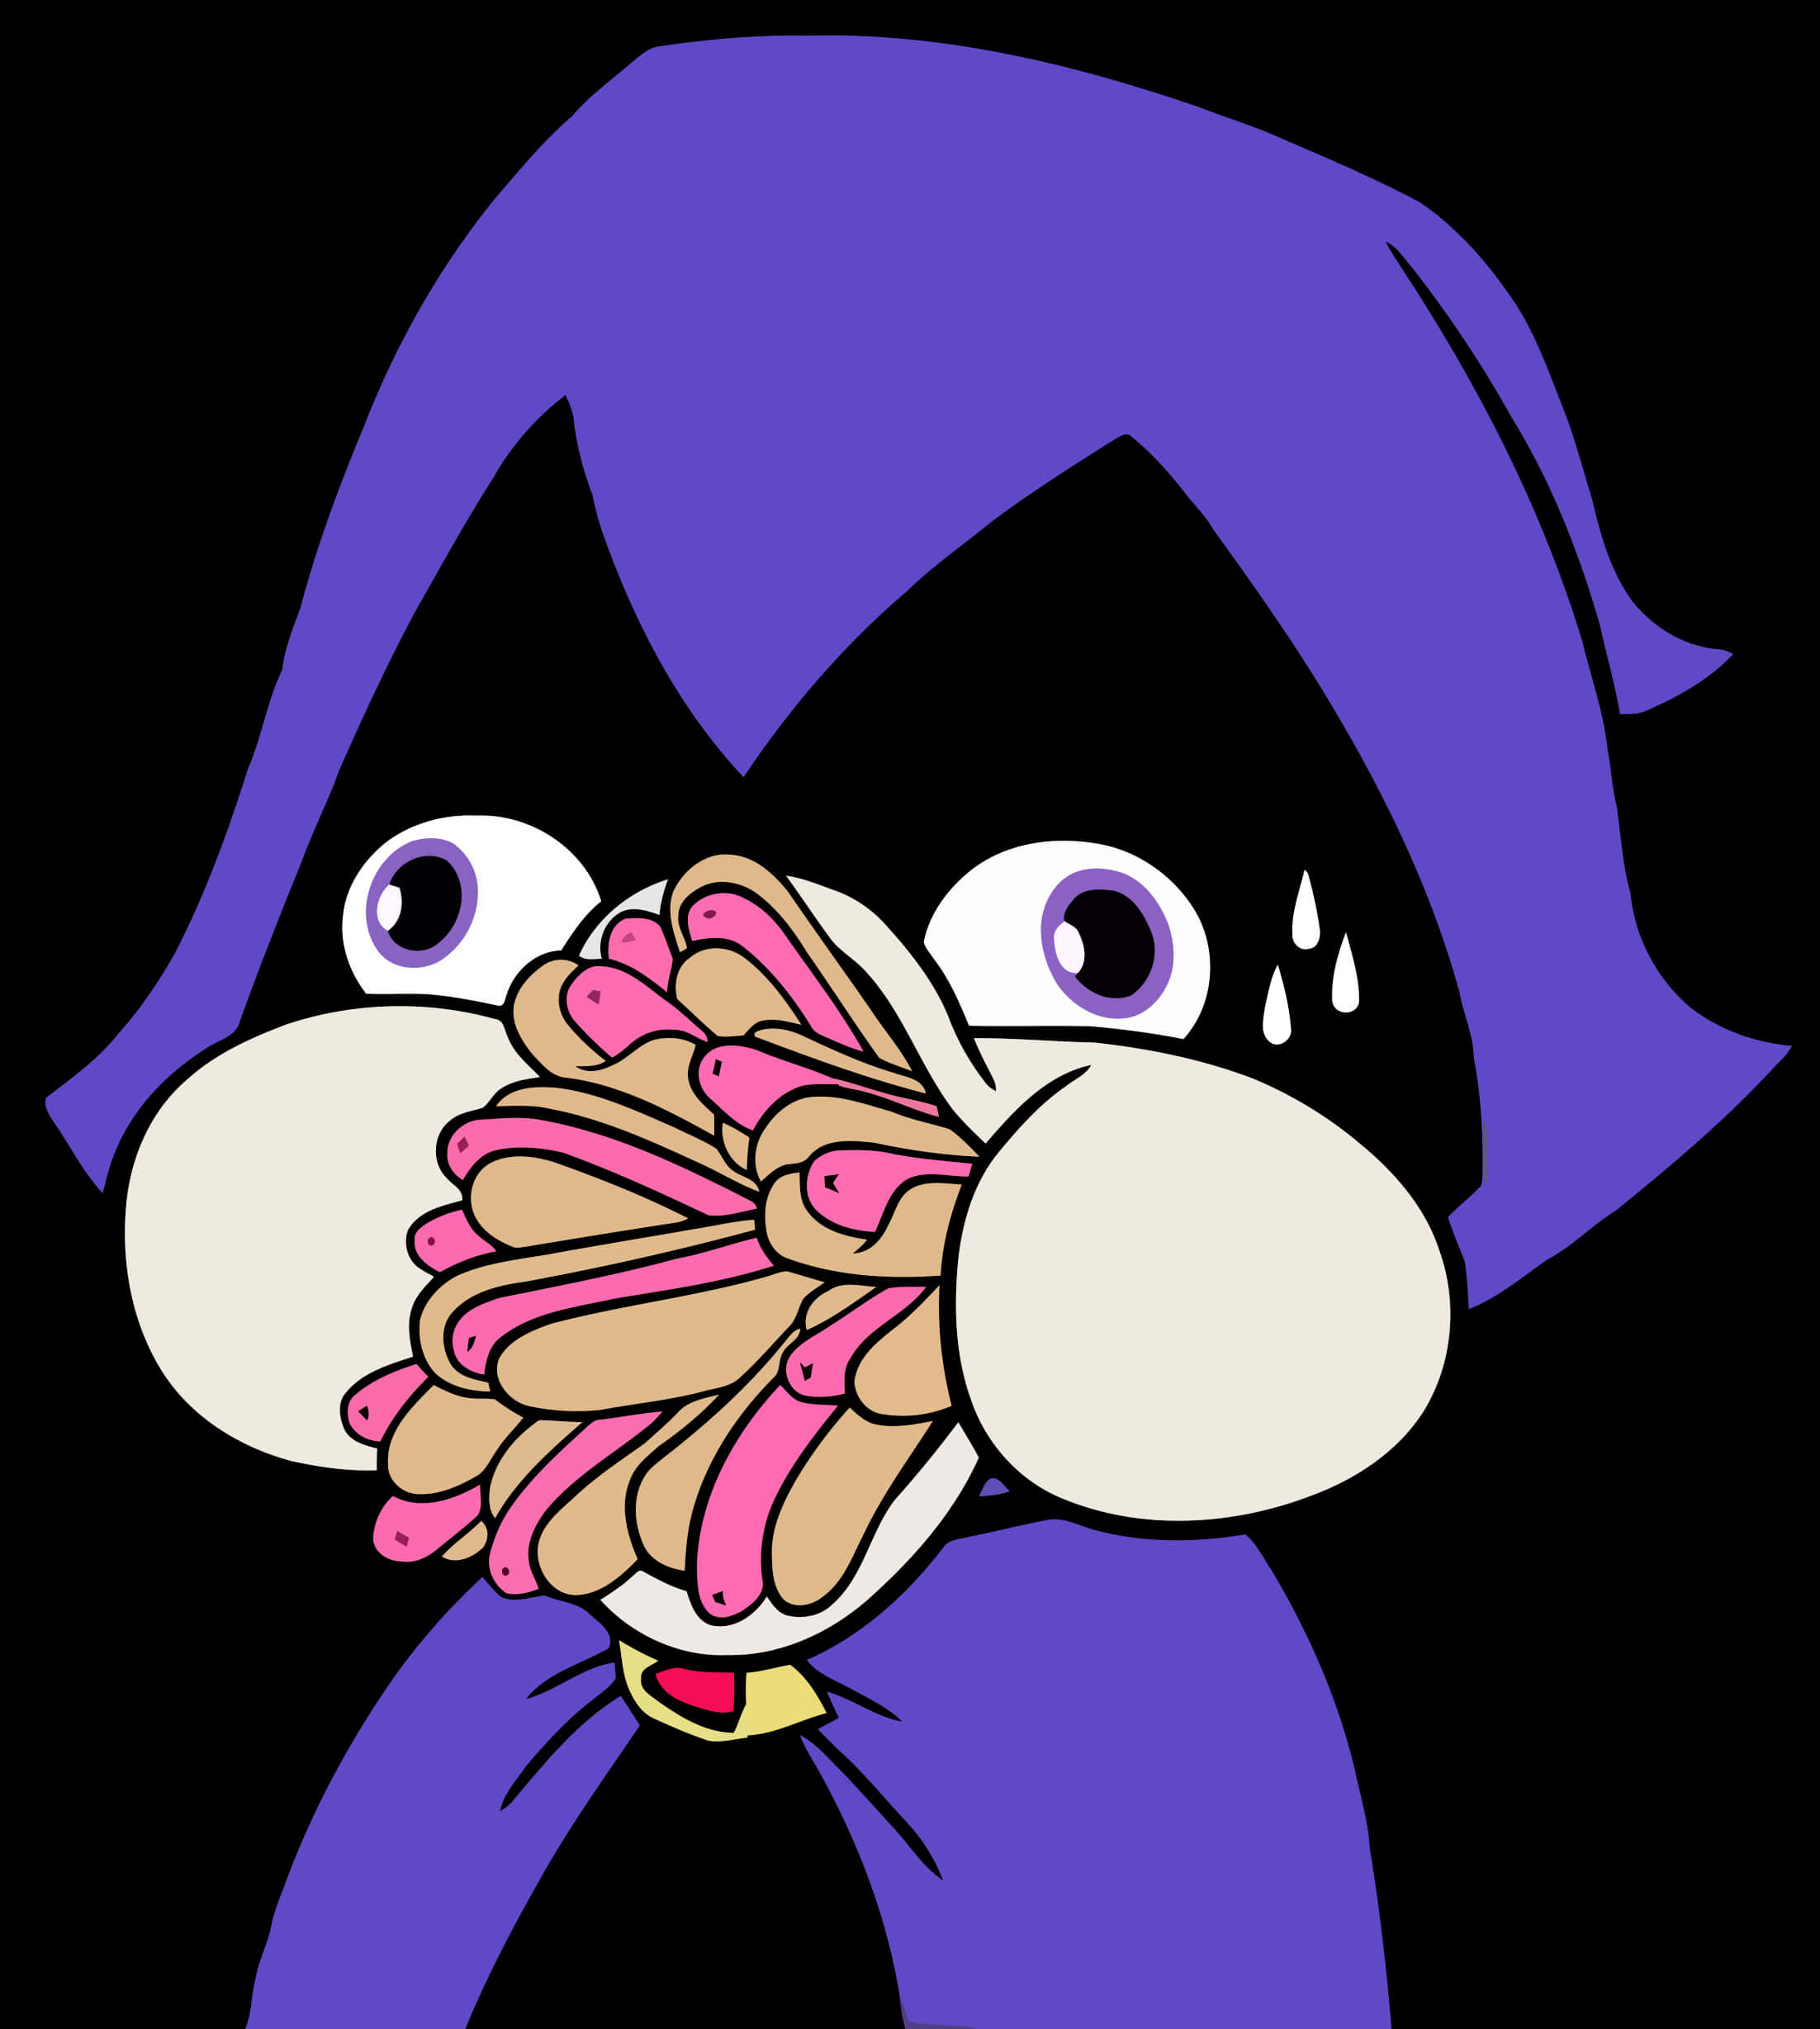 Cartoon Of A Purple Hooded Figure With A Bunch Of Cookies In Its Mouth